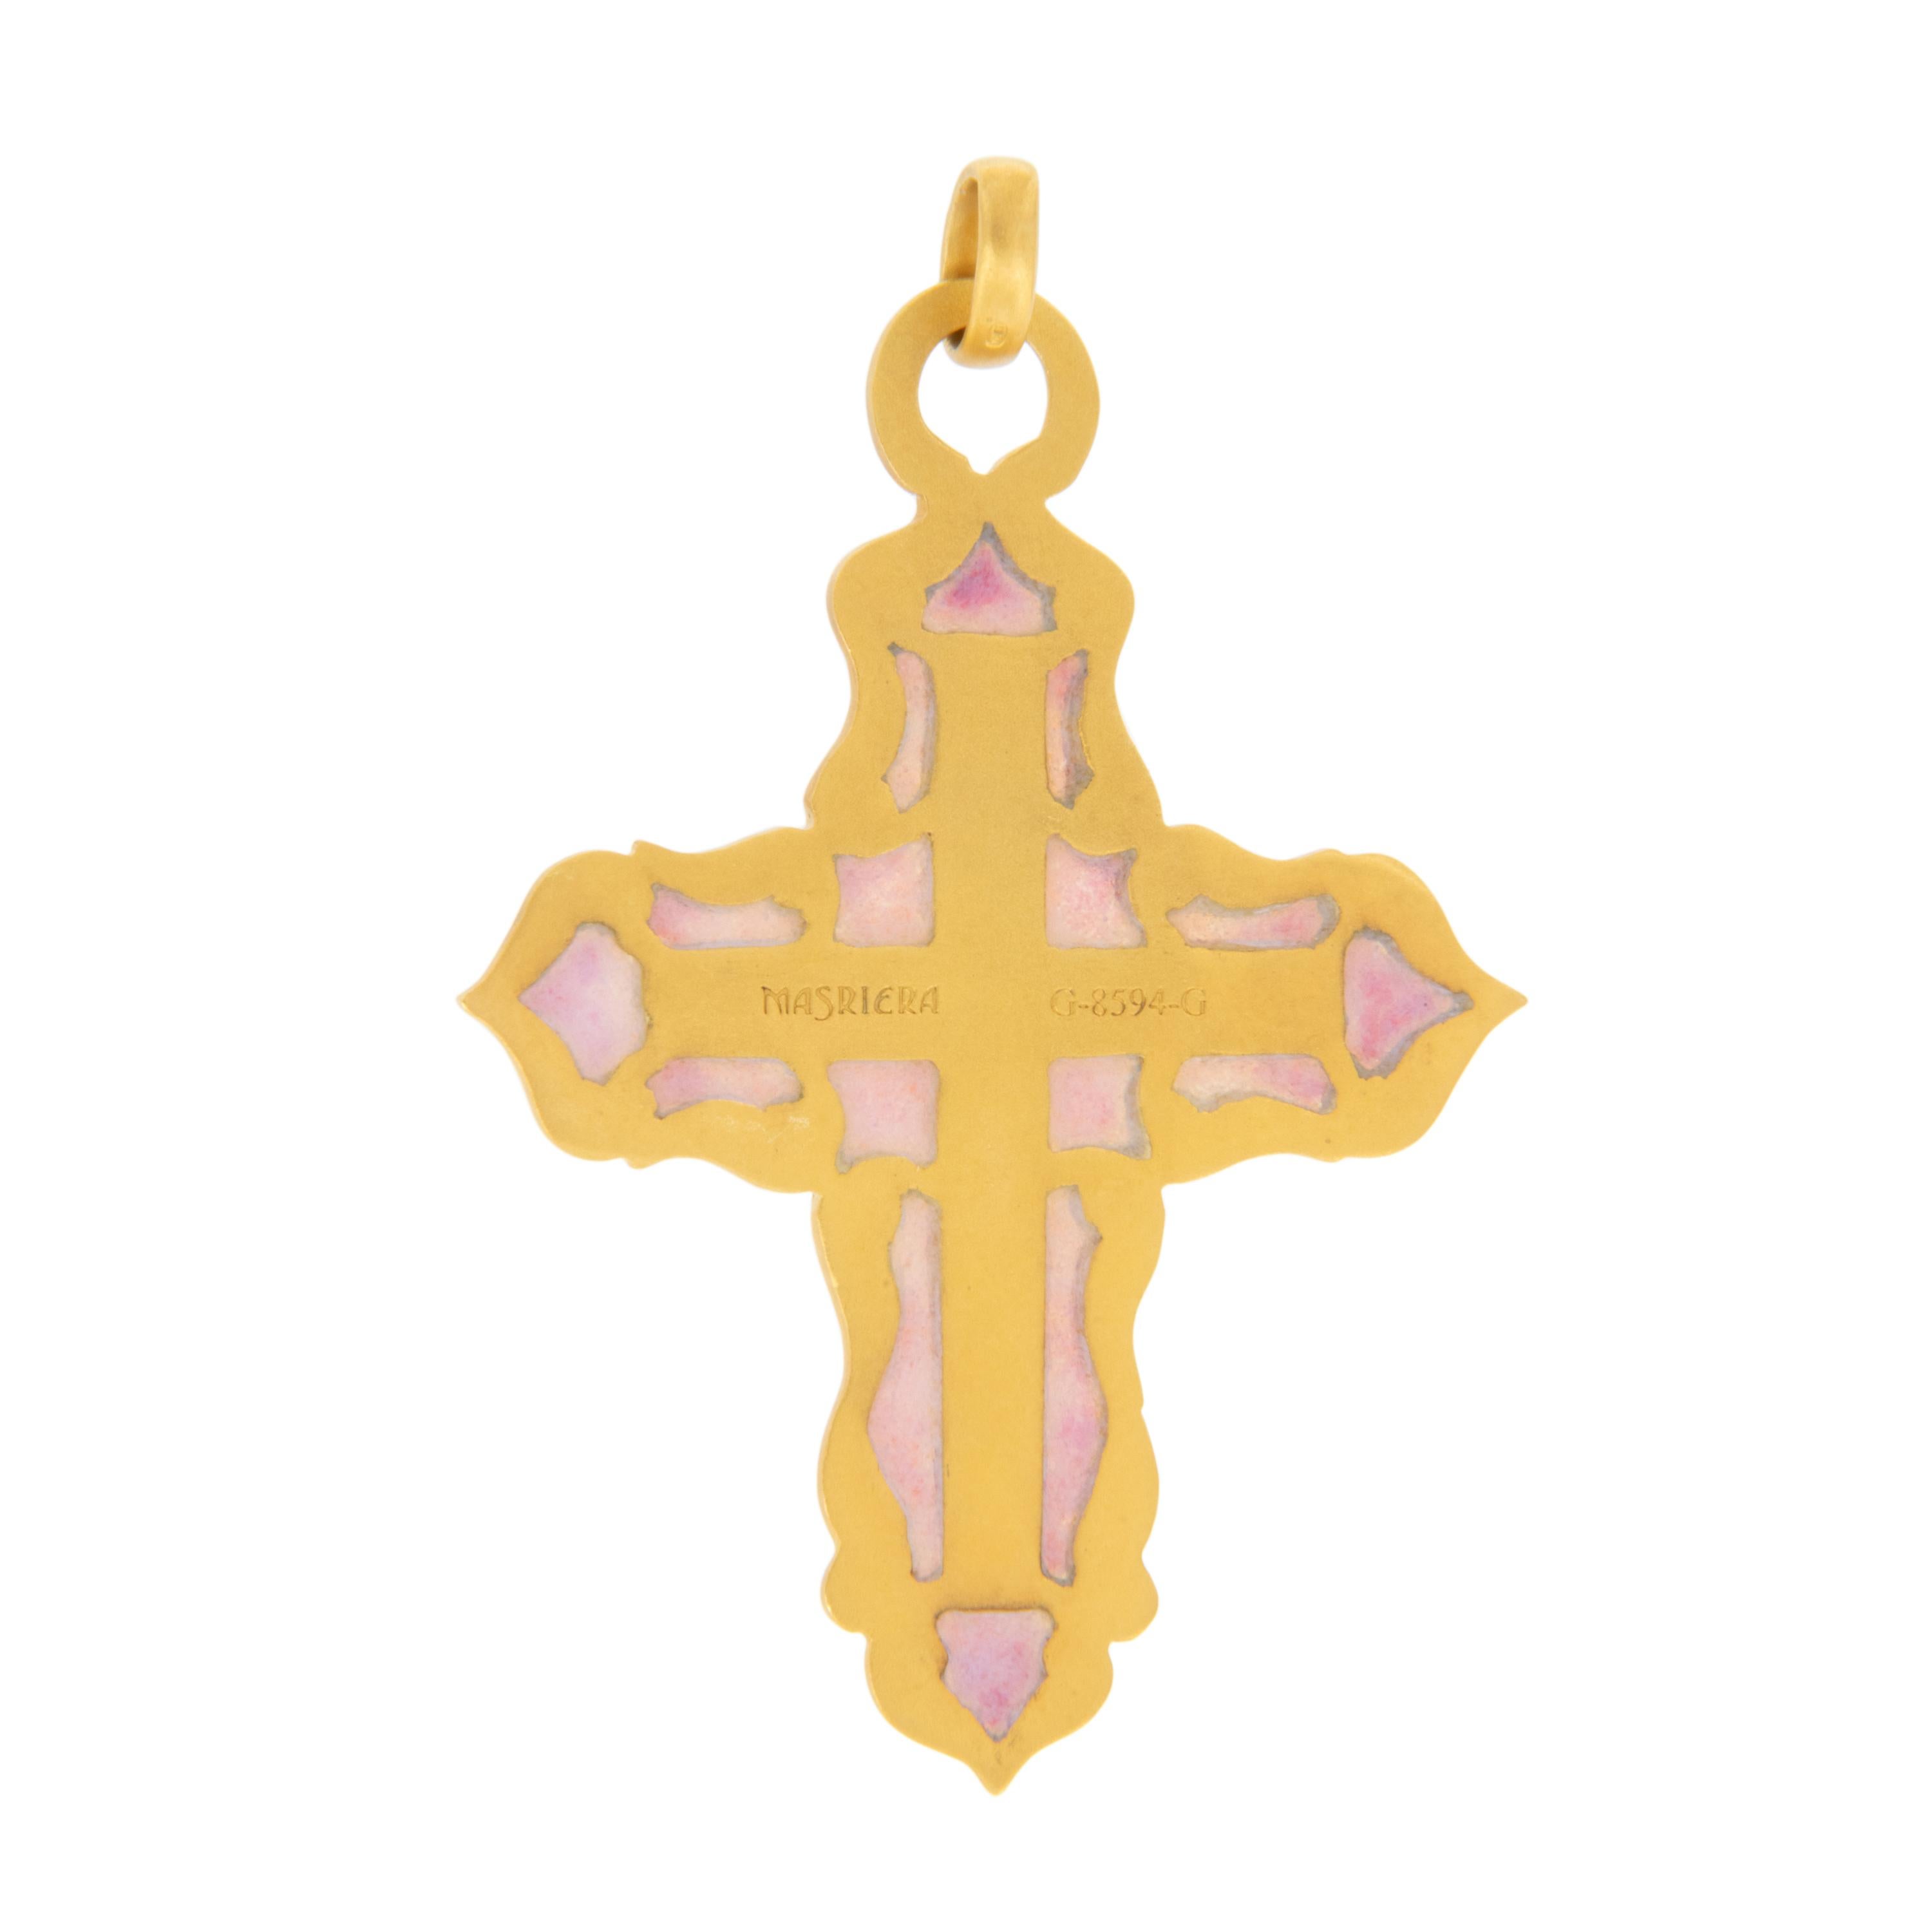 Made in Spain by world renown Masriera, specializing in Art Nouveau and fired enamel techniques - this gorgeous 18 Karat yellow gold cross pendant with Fired Enamel is breathtaking! Exquisite details with harmonious colors, you will treasure this